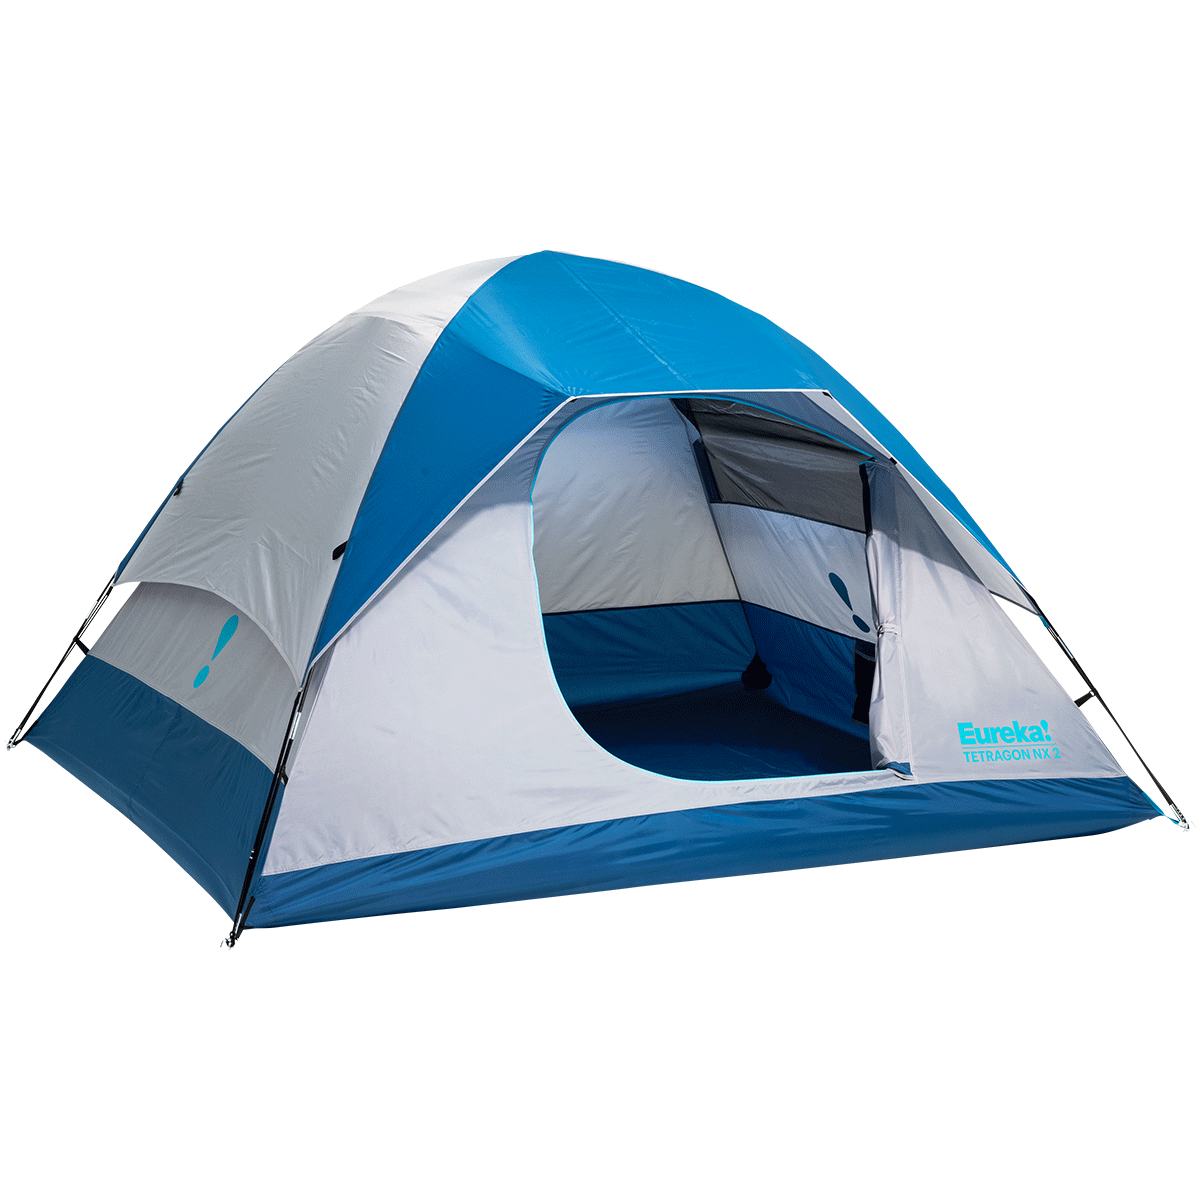 Tetragon NX 2 person tent with rainfly on and with door opened and closed